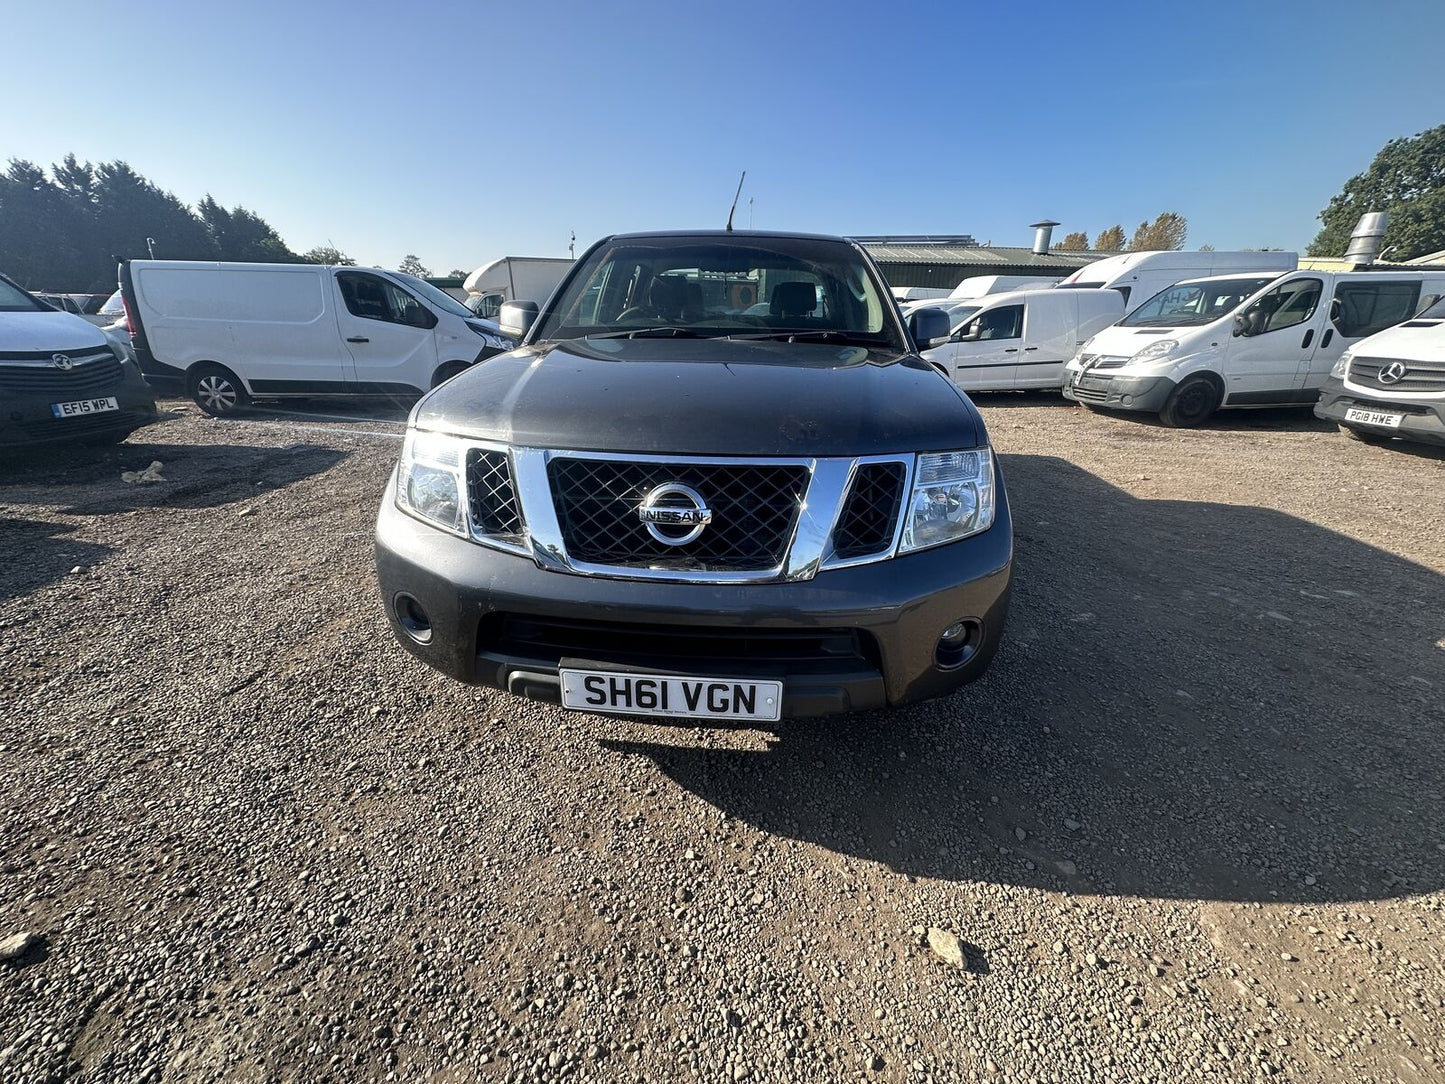 Bid on ONLY 107K MILES : 61 PLATE NISSAN NAVARA DOUBLE CAB PICK UP (NO VAT ON HAMMER)- Buy &amp; Sell on Auction with EAMA Group